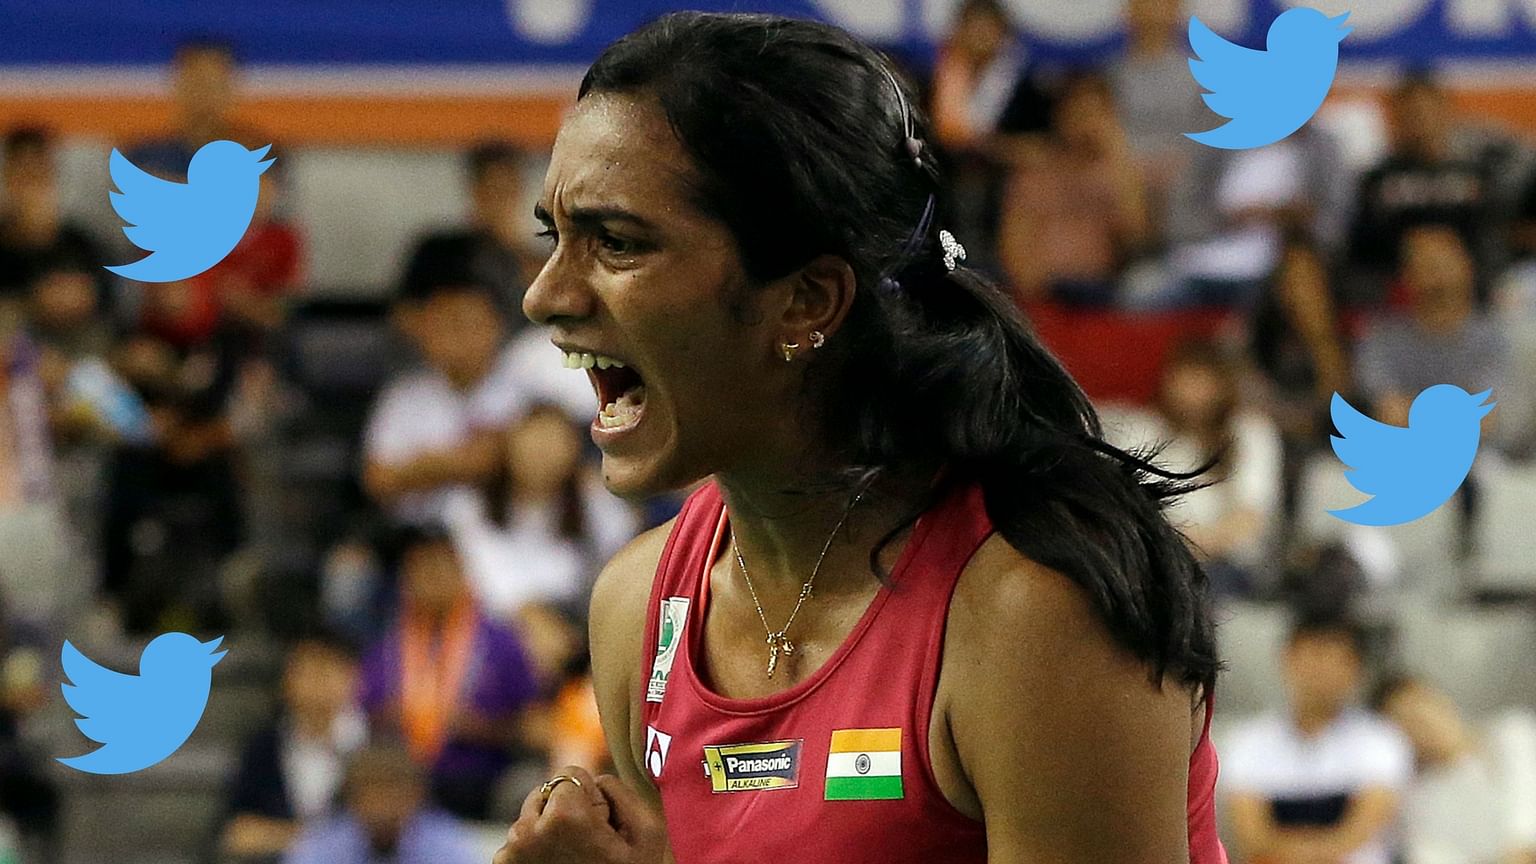 PV Sindhu celebrates after winning the Korea Open Super Series in Seoul on 17 September.